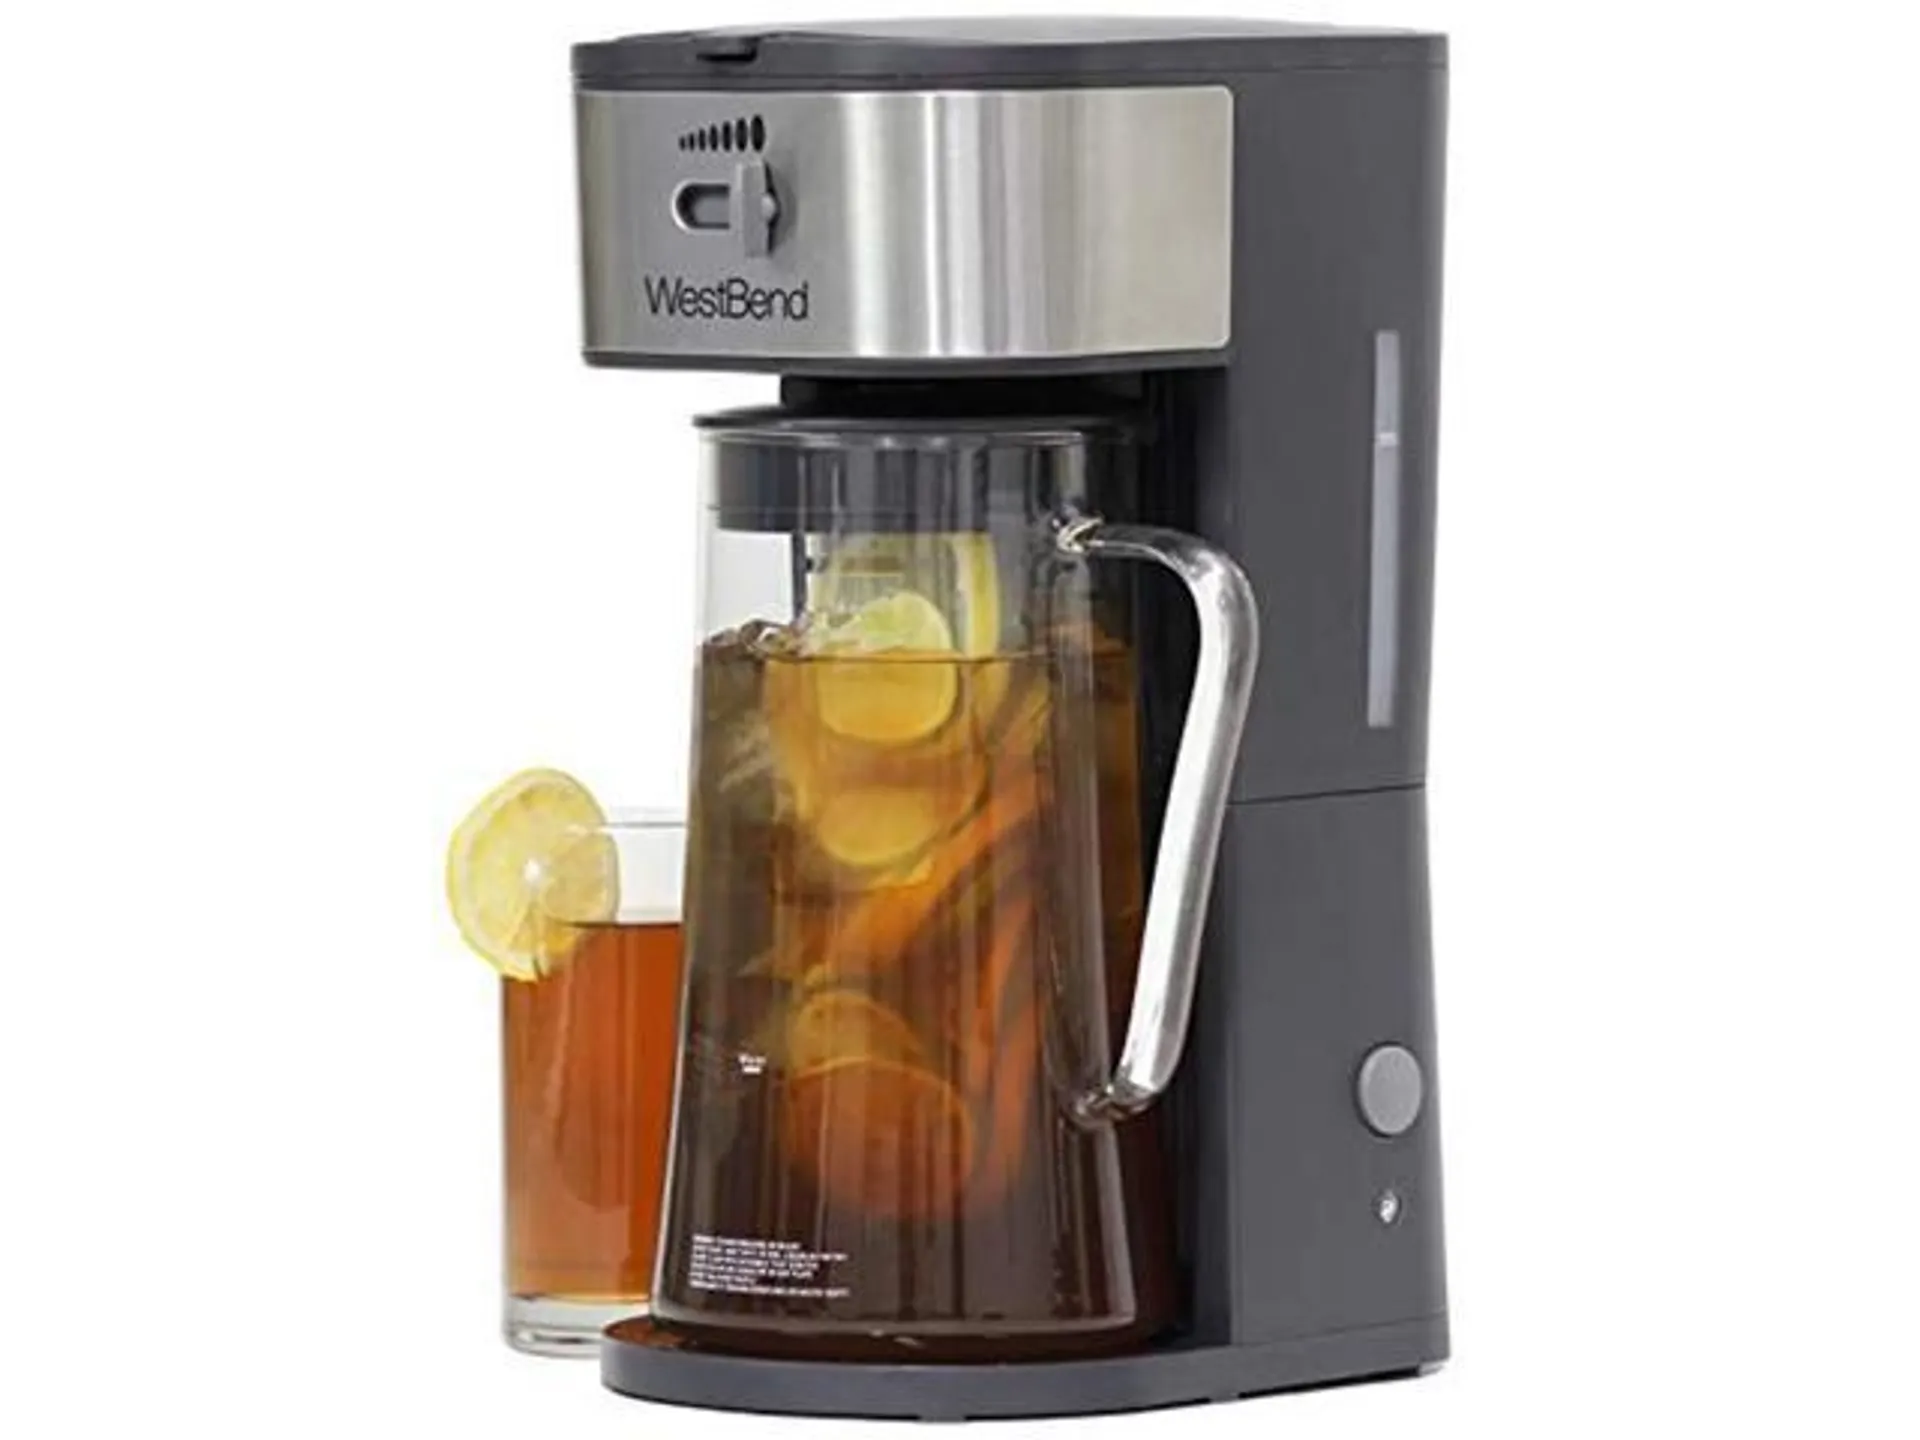 west bend it500 iced tea maker or iced coffee maker includes an infusion tube to customize the flavor and features auto shut-of